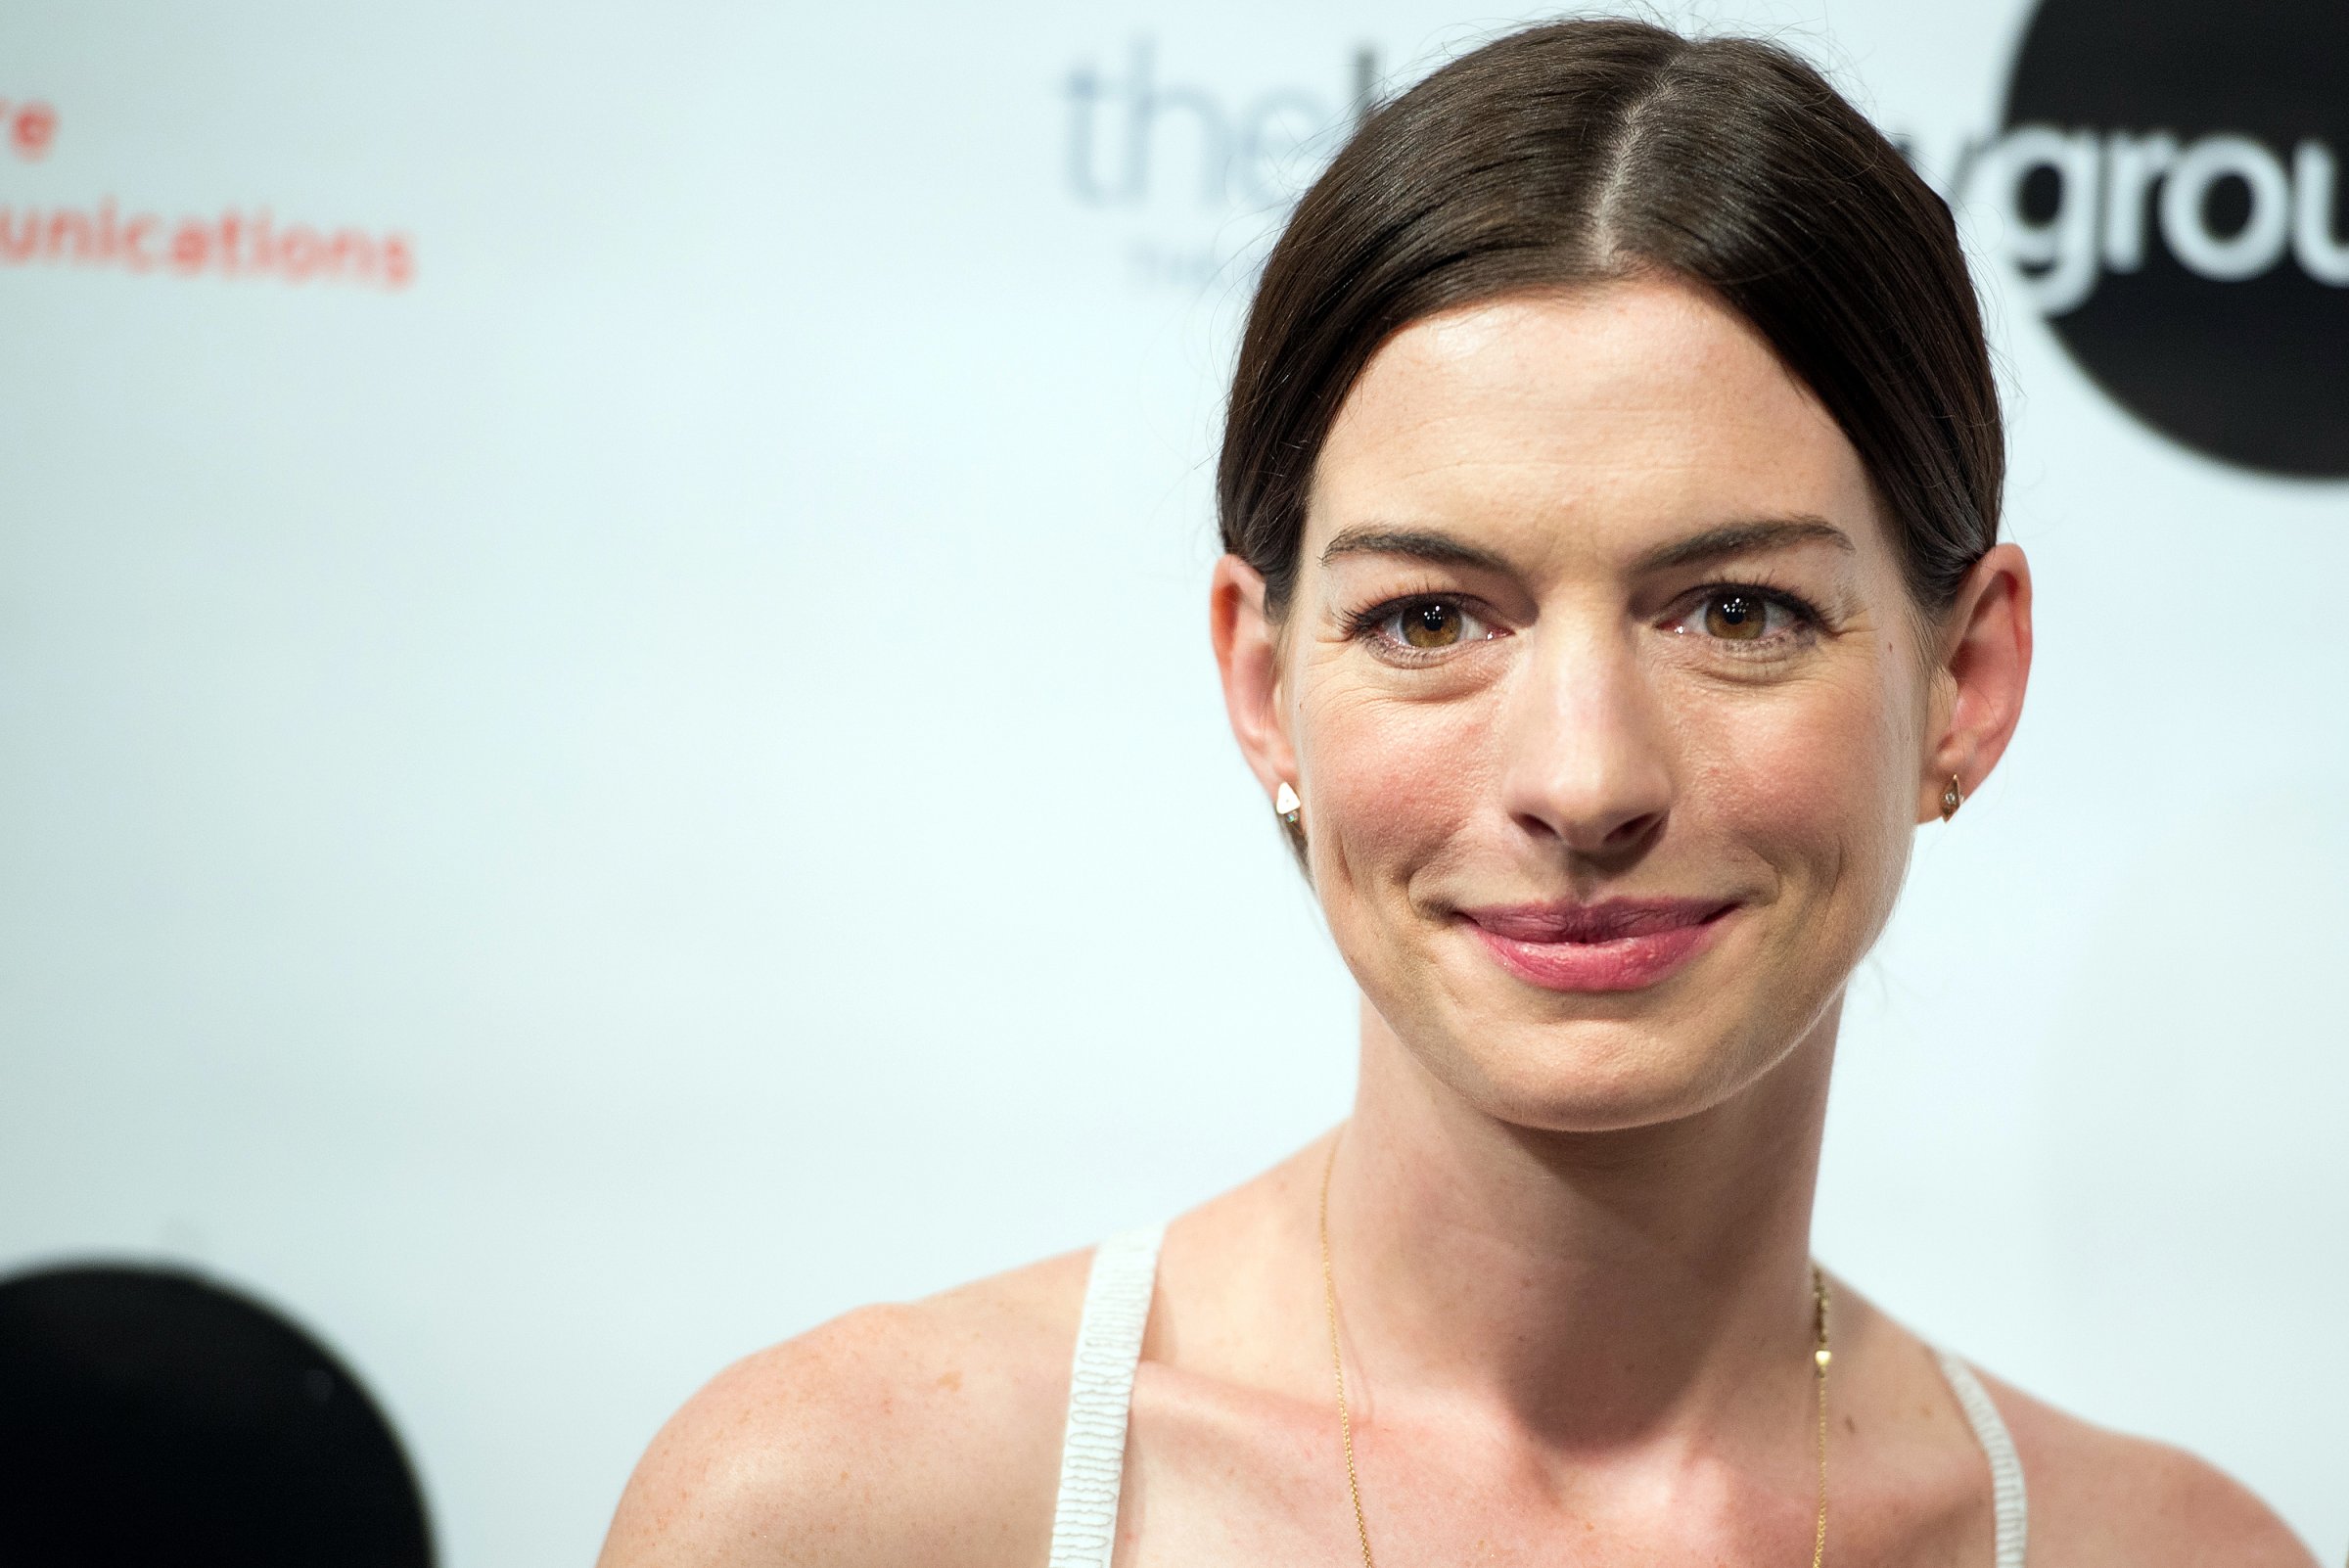 Actress Anne Hathaway attends "An Actor's Companion" book release at The Barrow Group on June 23, 2015 in New York City.